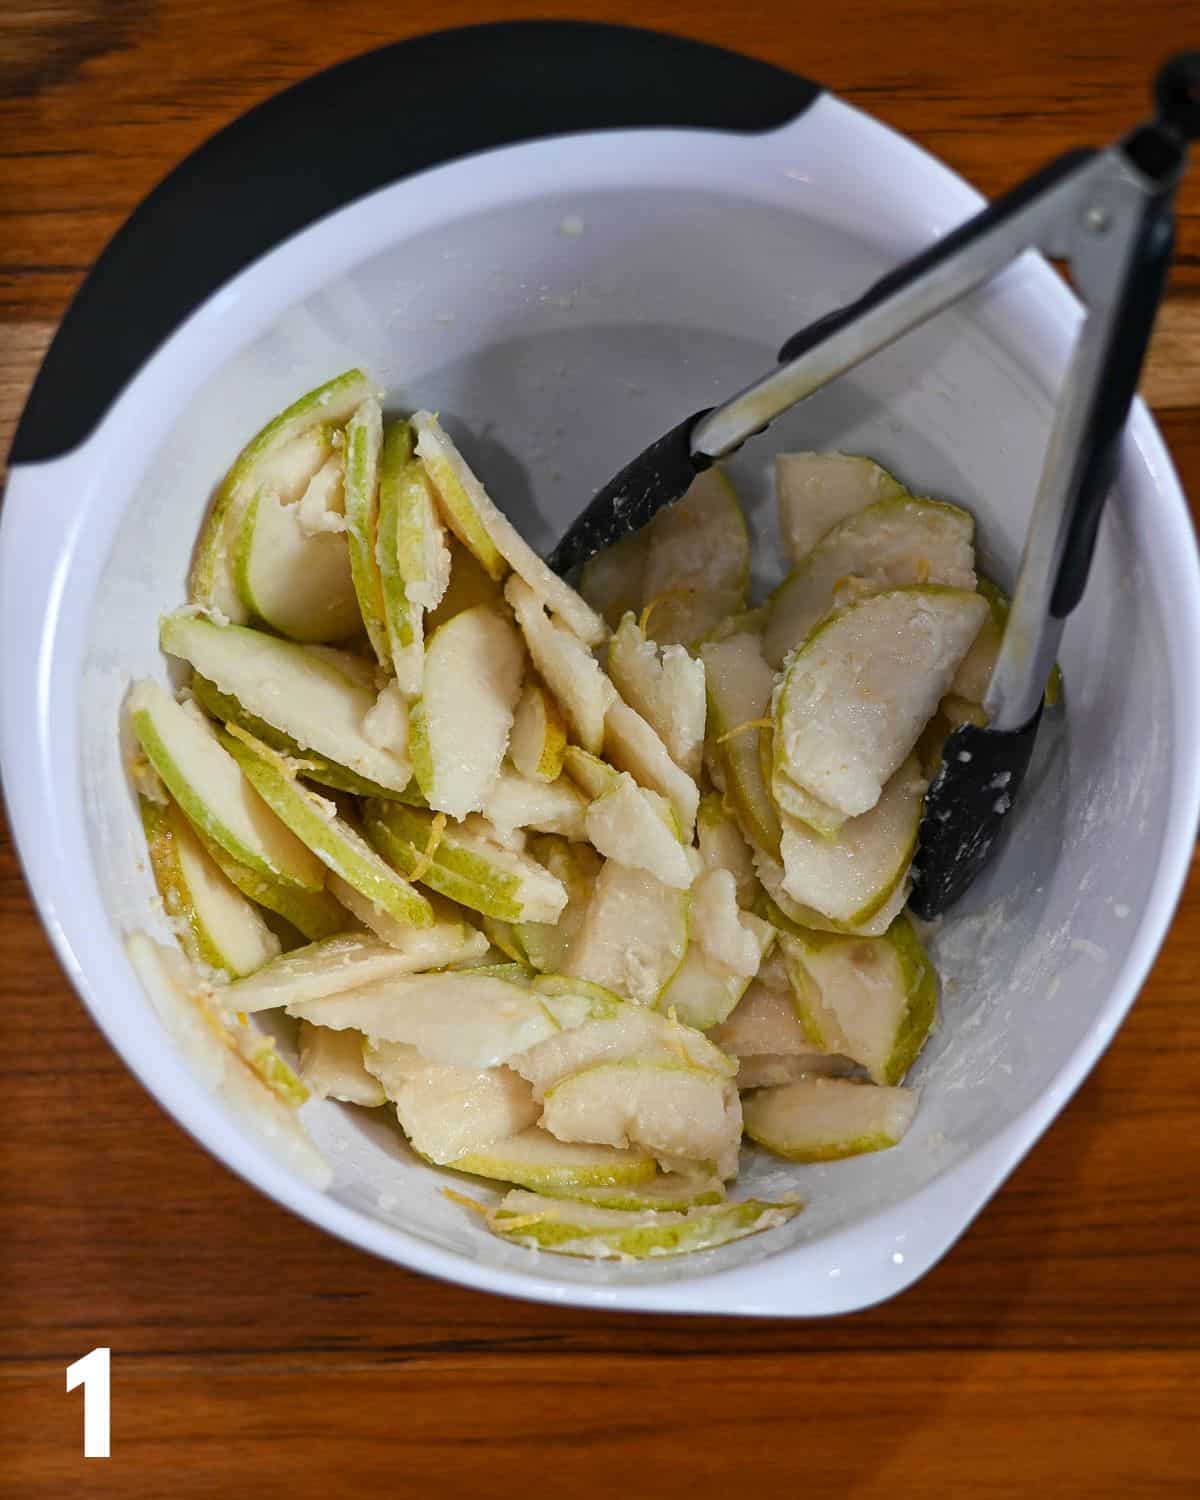 Sliced pears, ginger, lemon and flour in a mixing bowl.